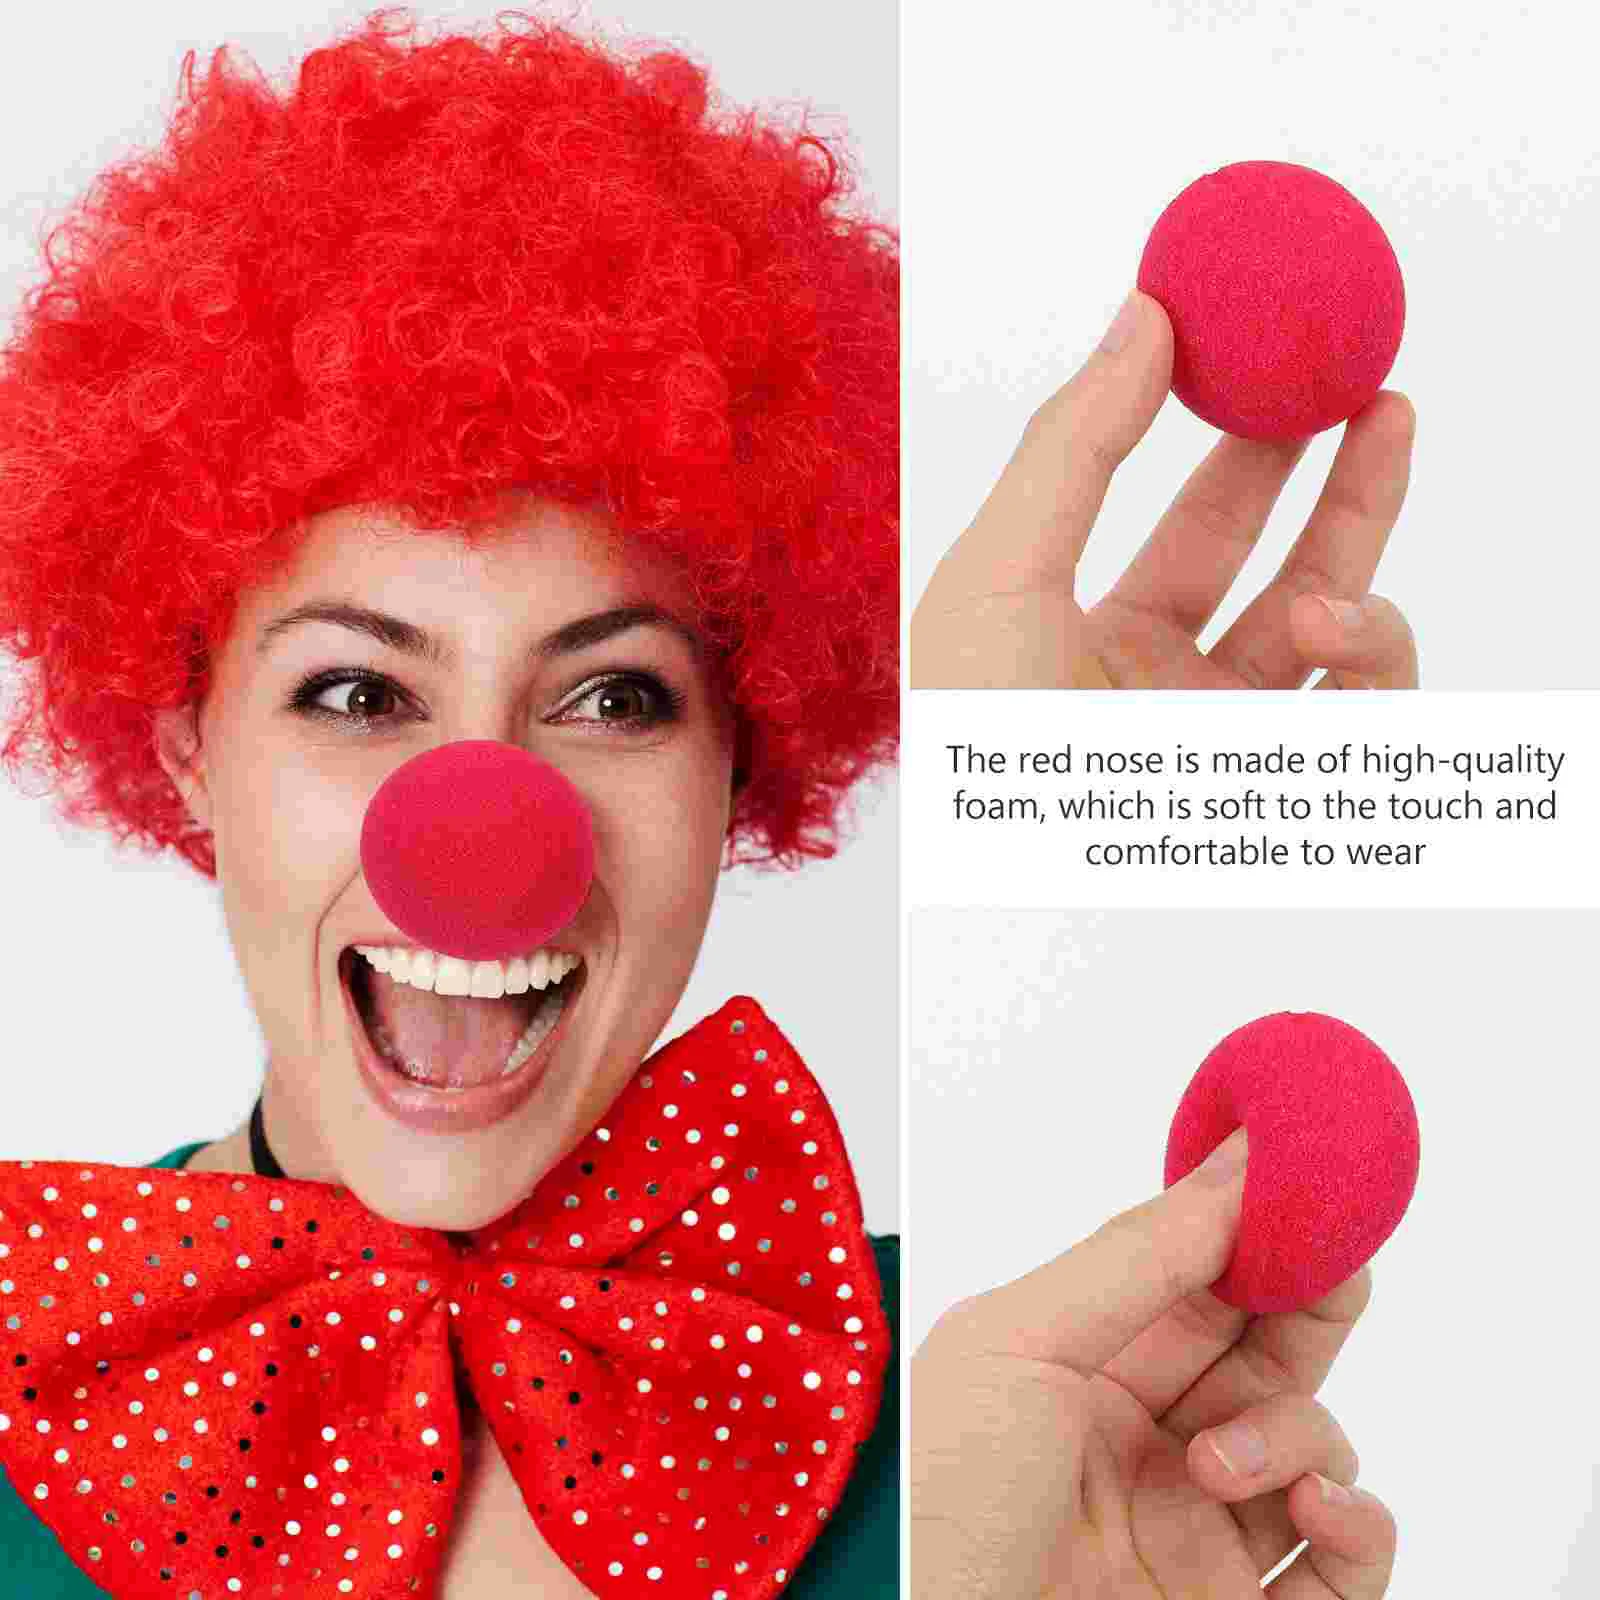 

25 Pcs Foam Nose Cosplay Decor Replaceable Clown Prop Red Dress Circus Noses Sponge Decorative Plaything Compact